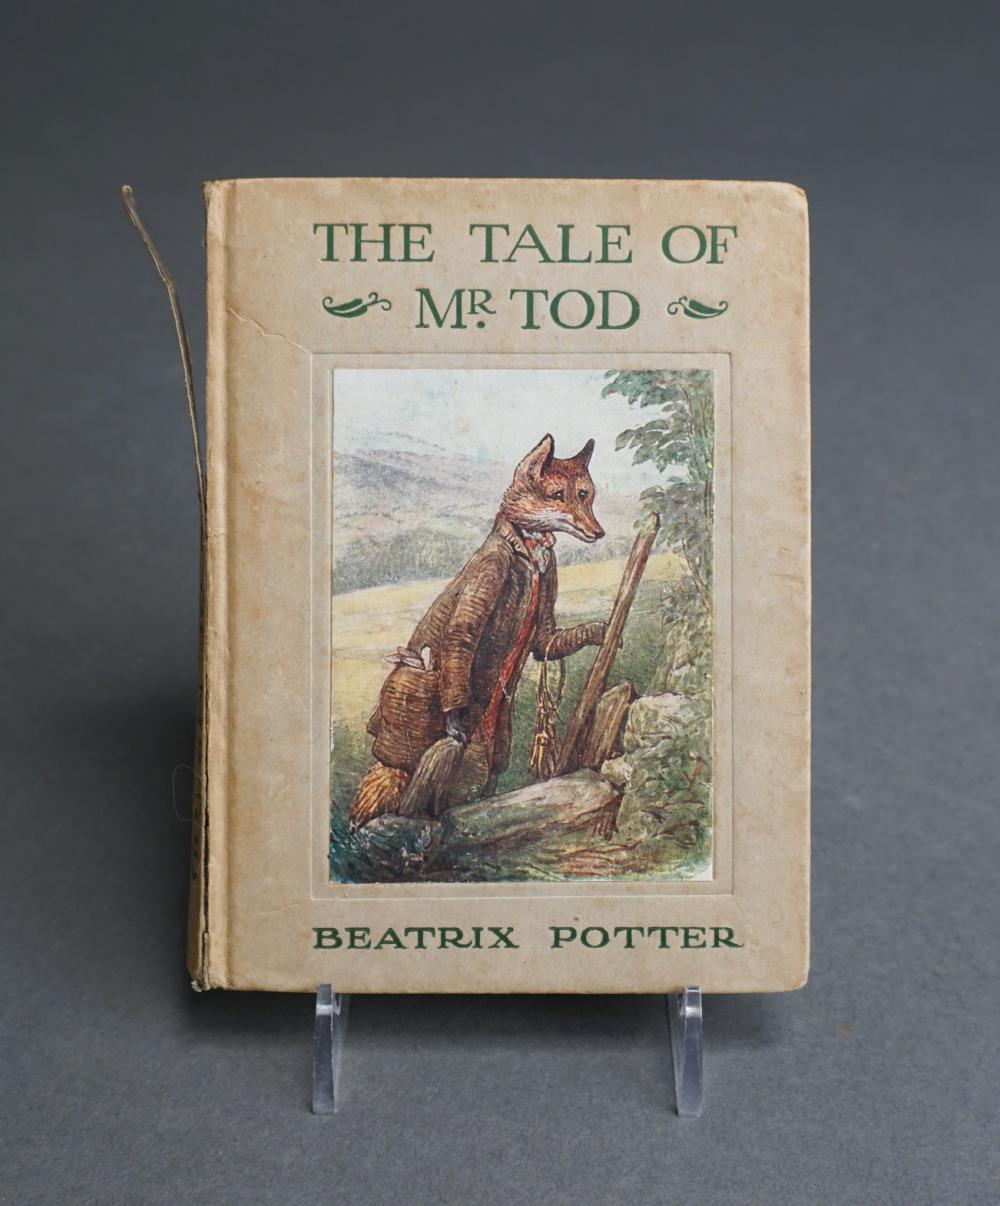 BEATRIX POTTER, THE TALE OF MR. TOD,